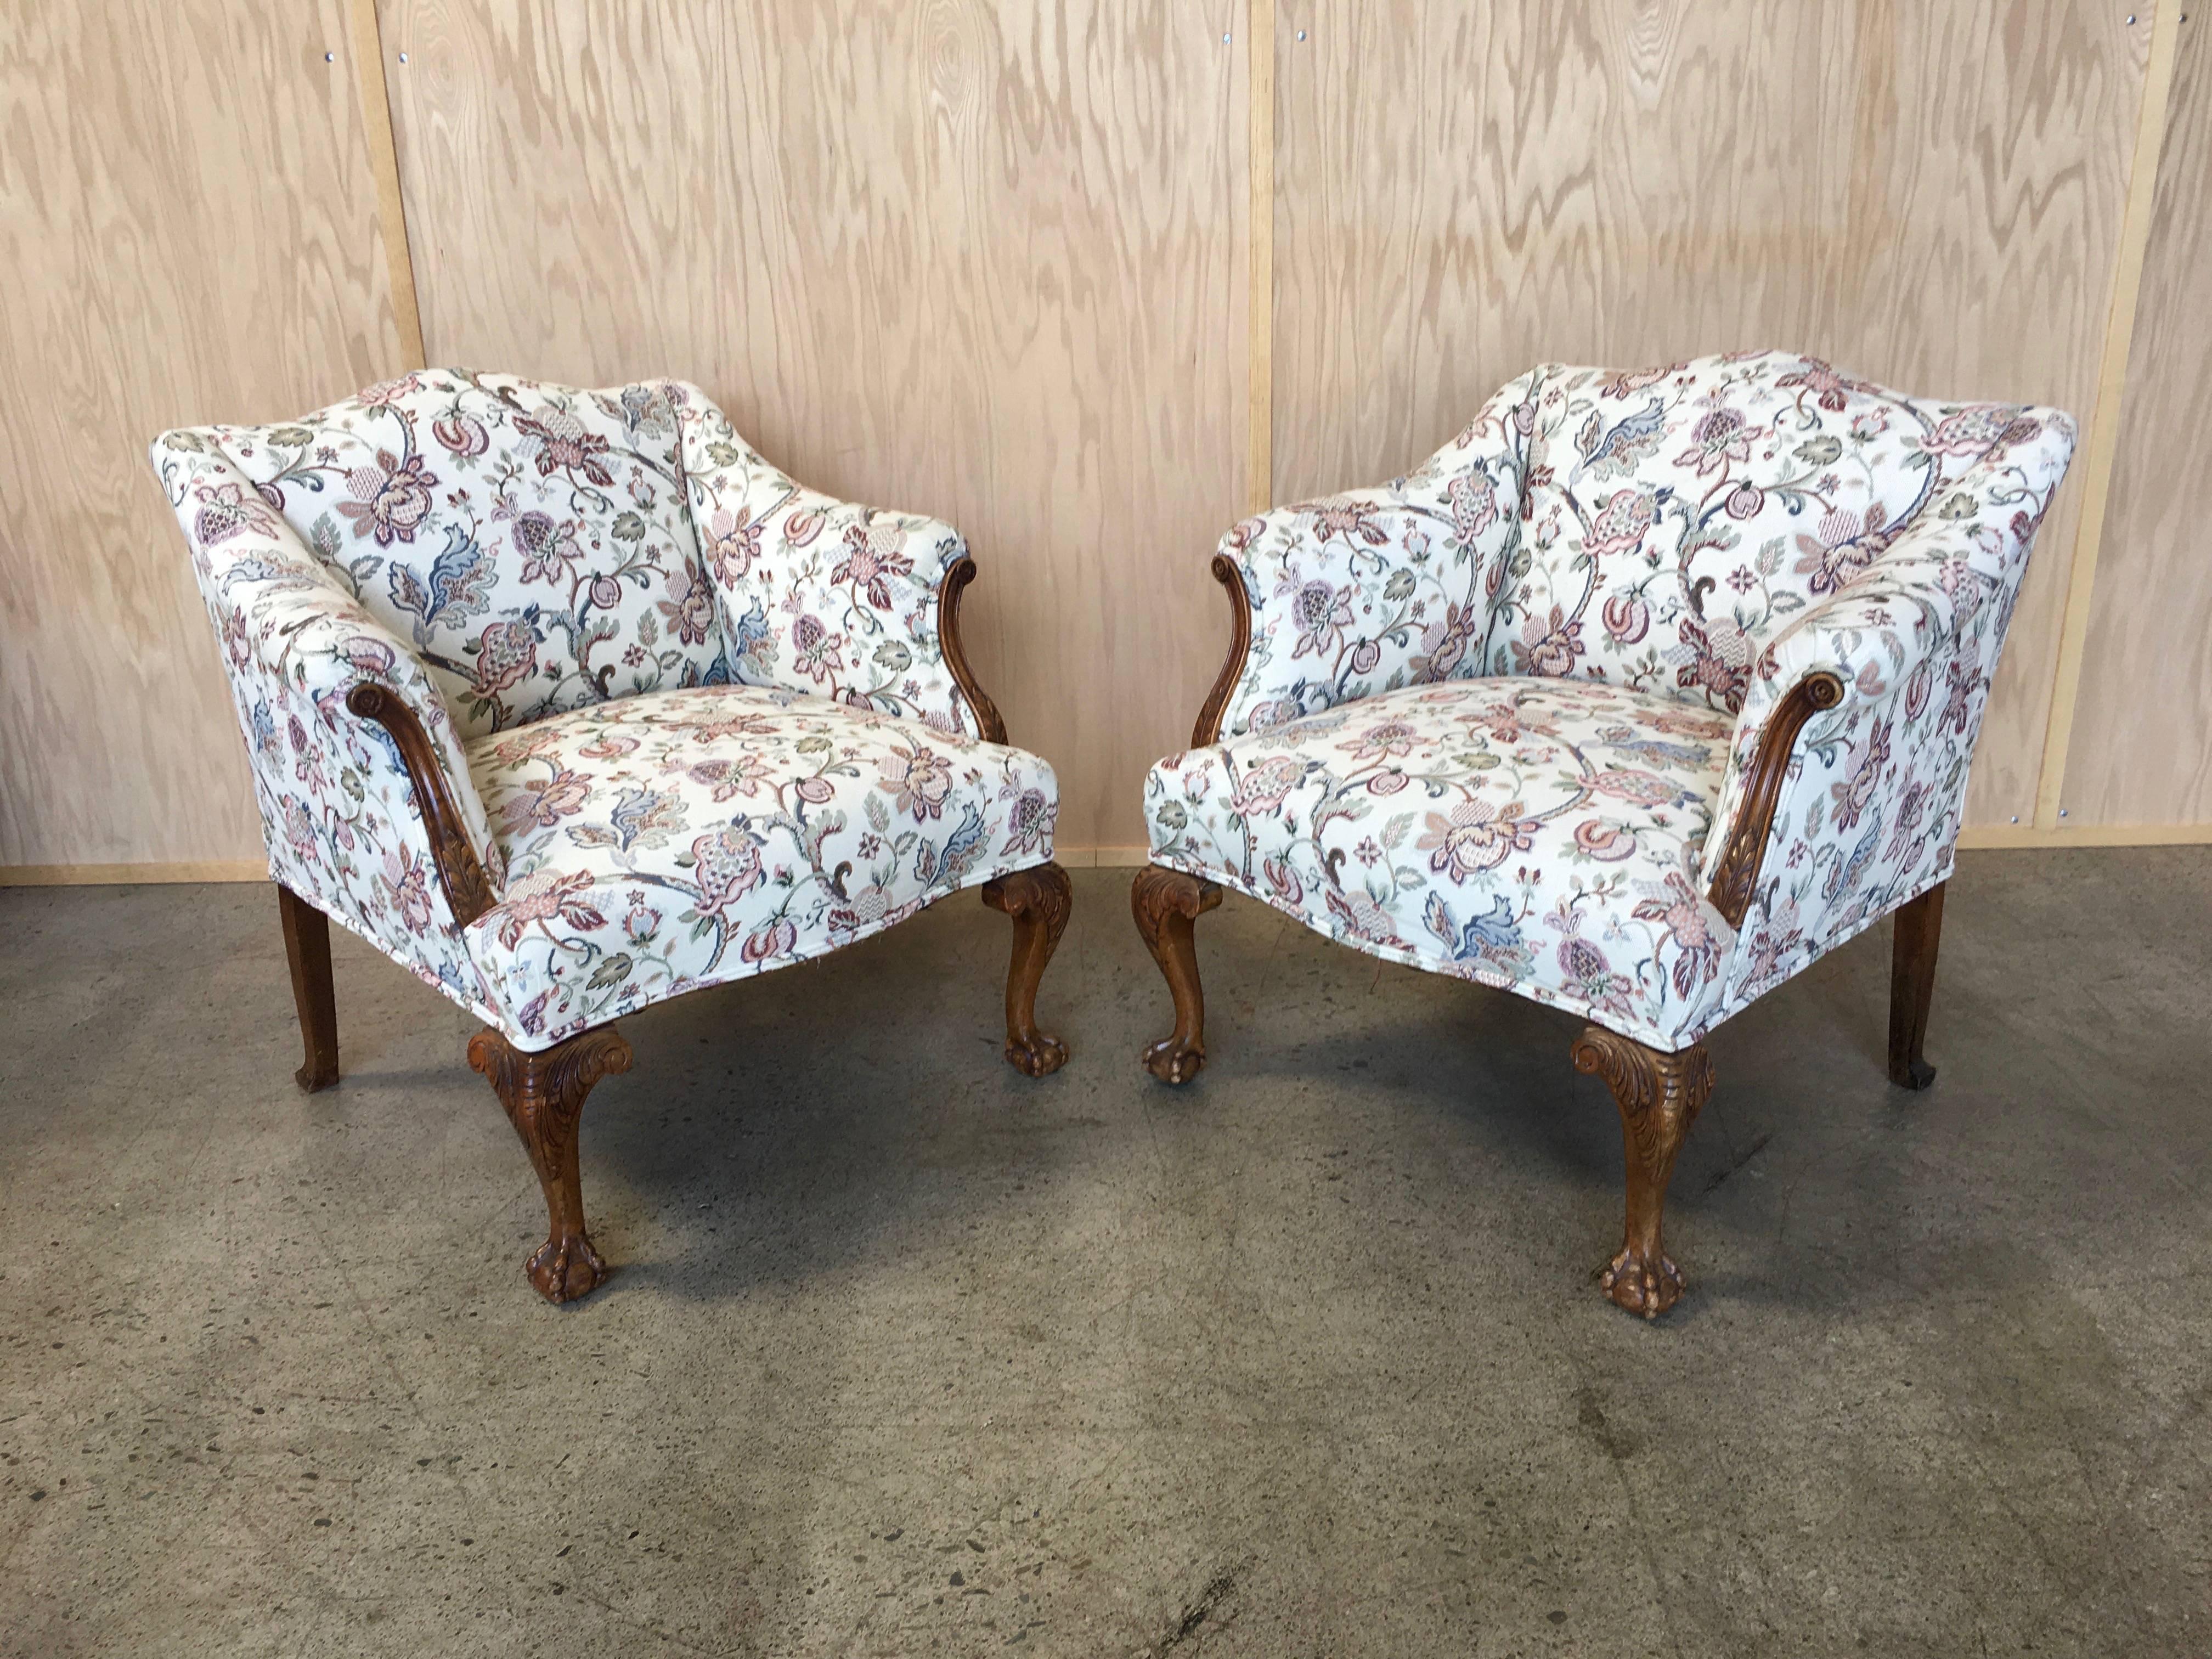 Pair of antique  Chippendale style armchairs, hand-carved.